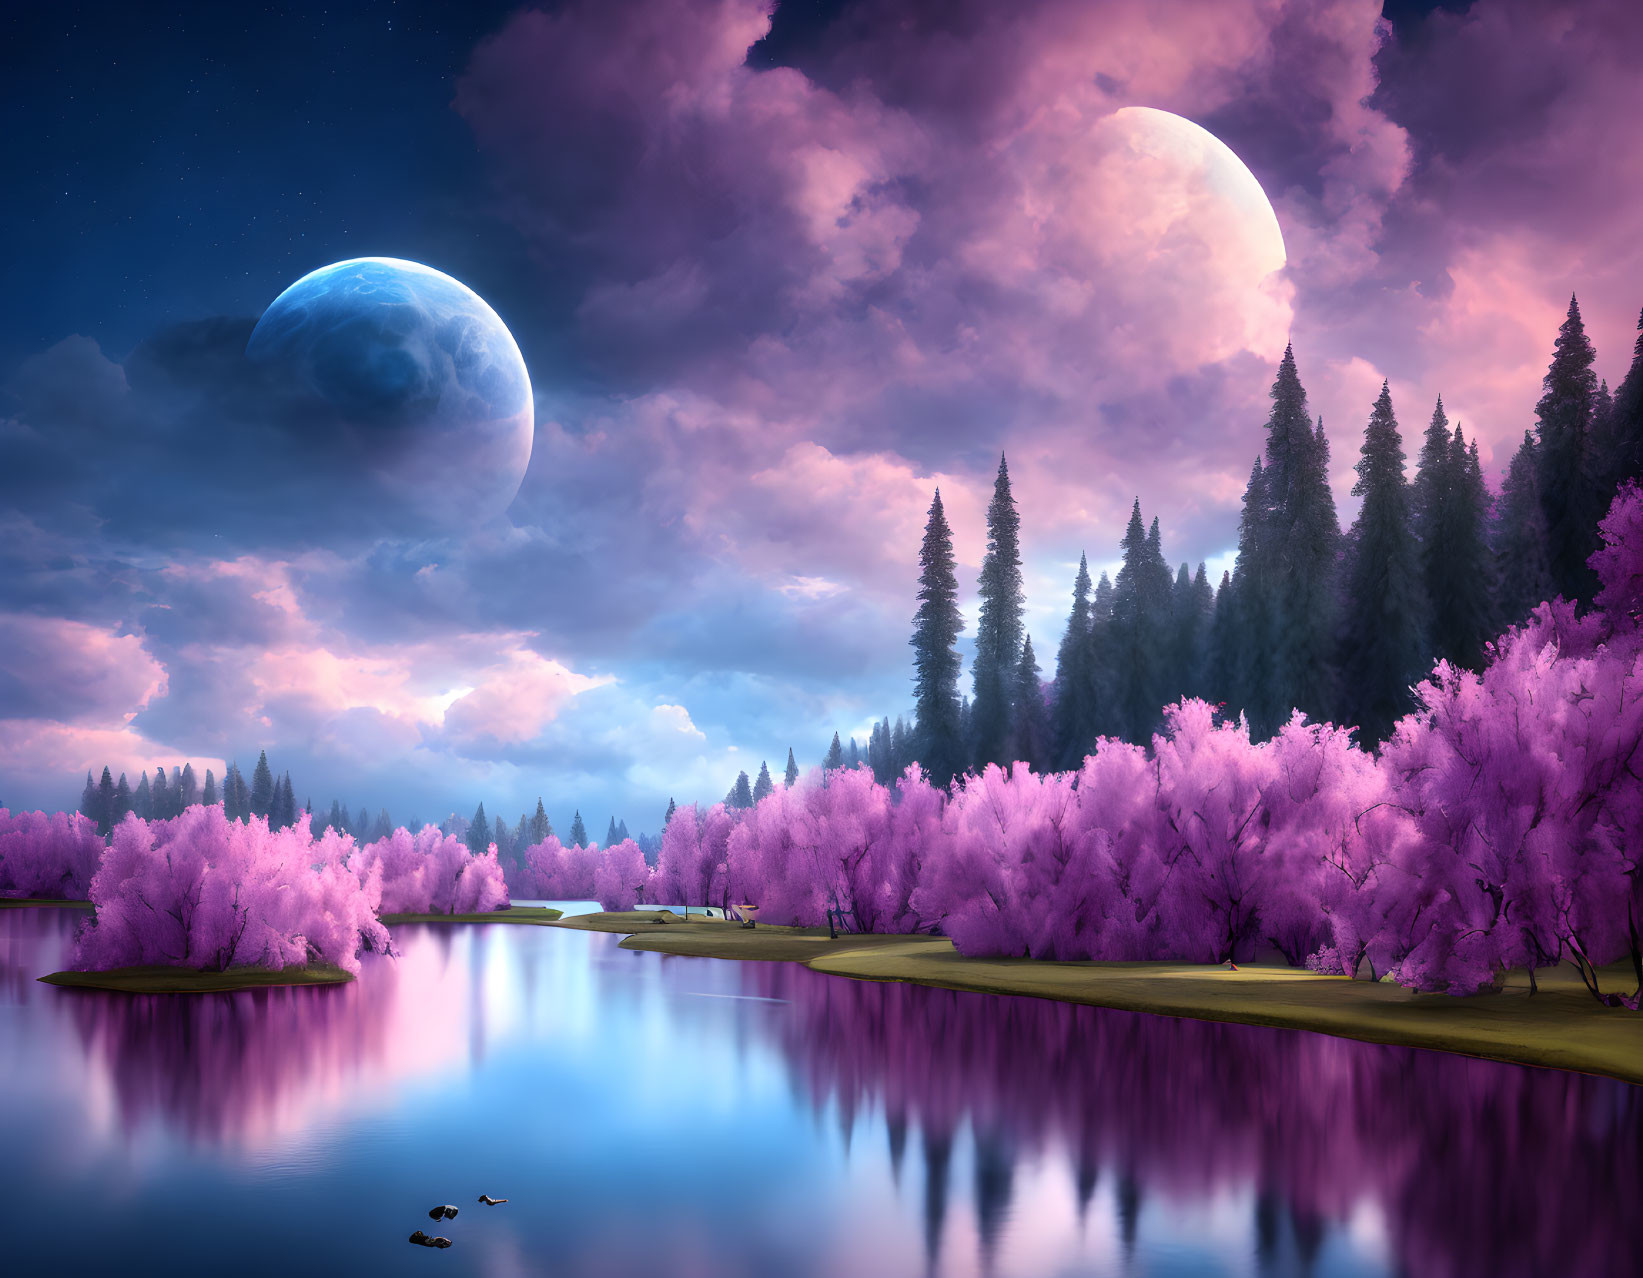 Tranquil landscape with pink trees, lake, moon, and dusk sky